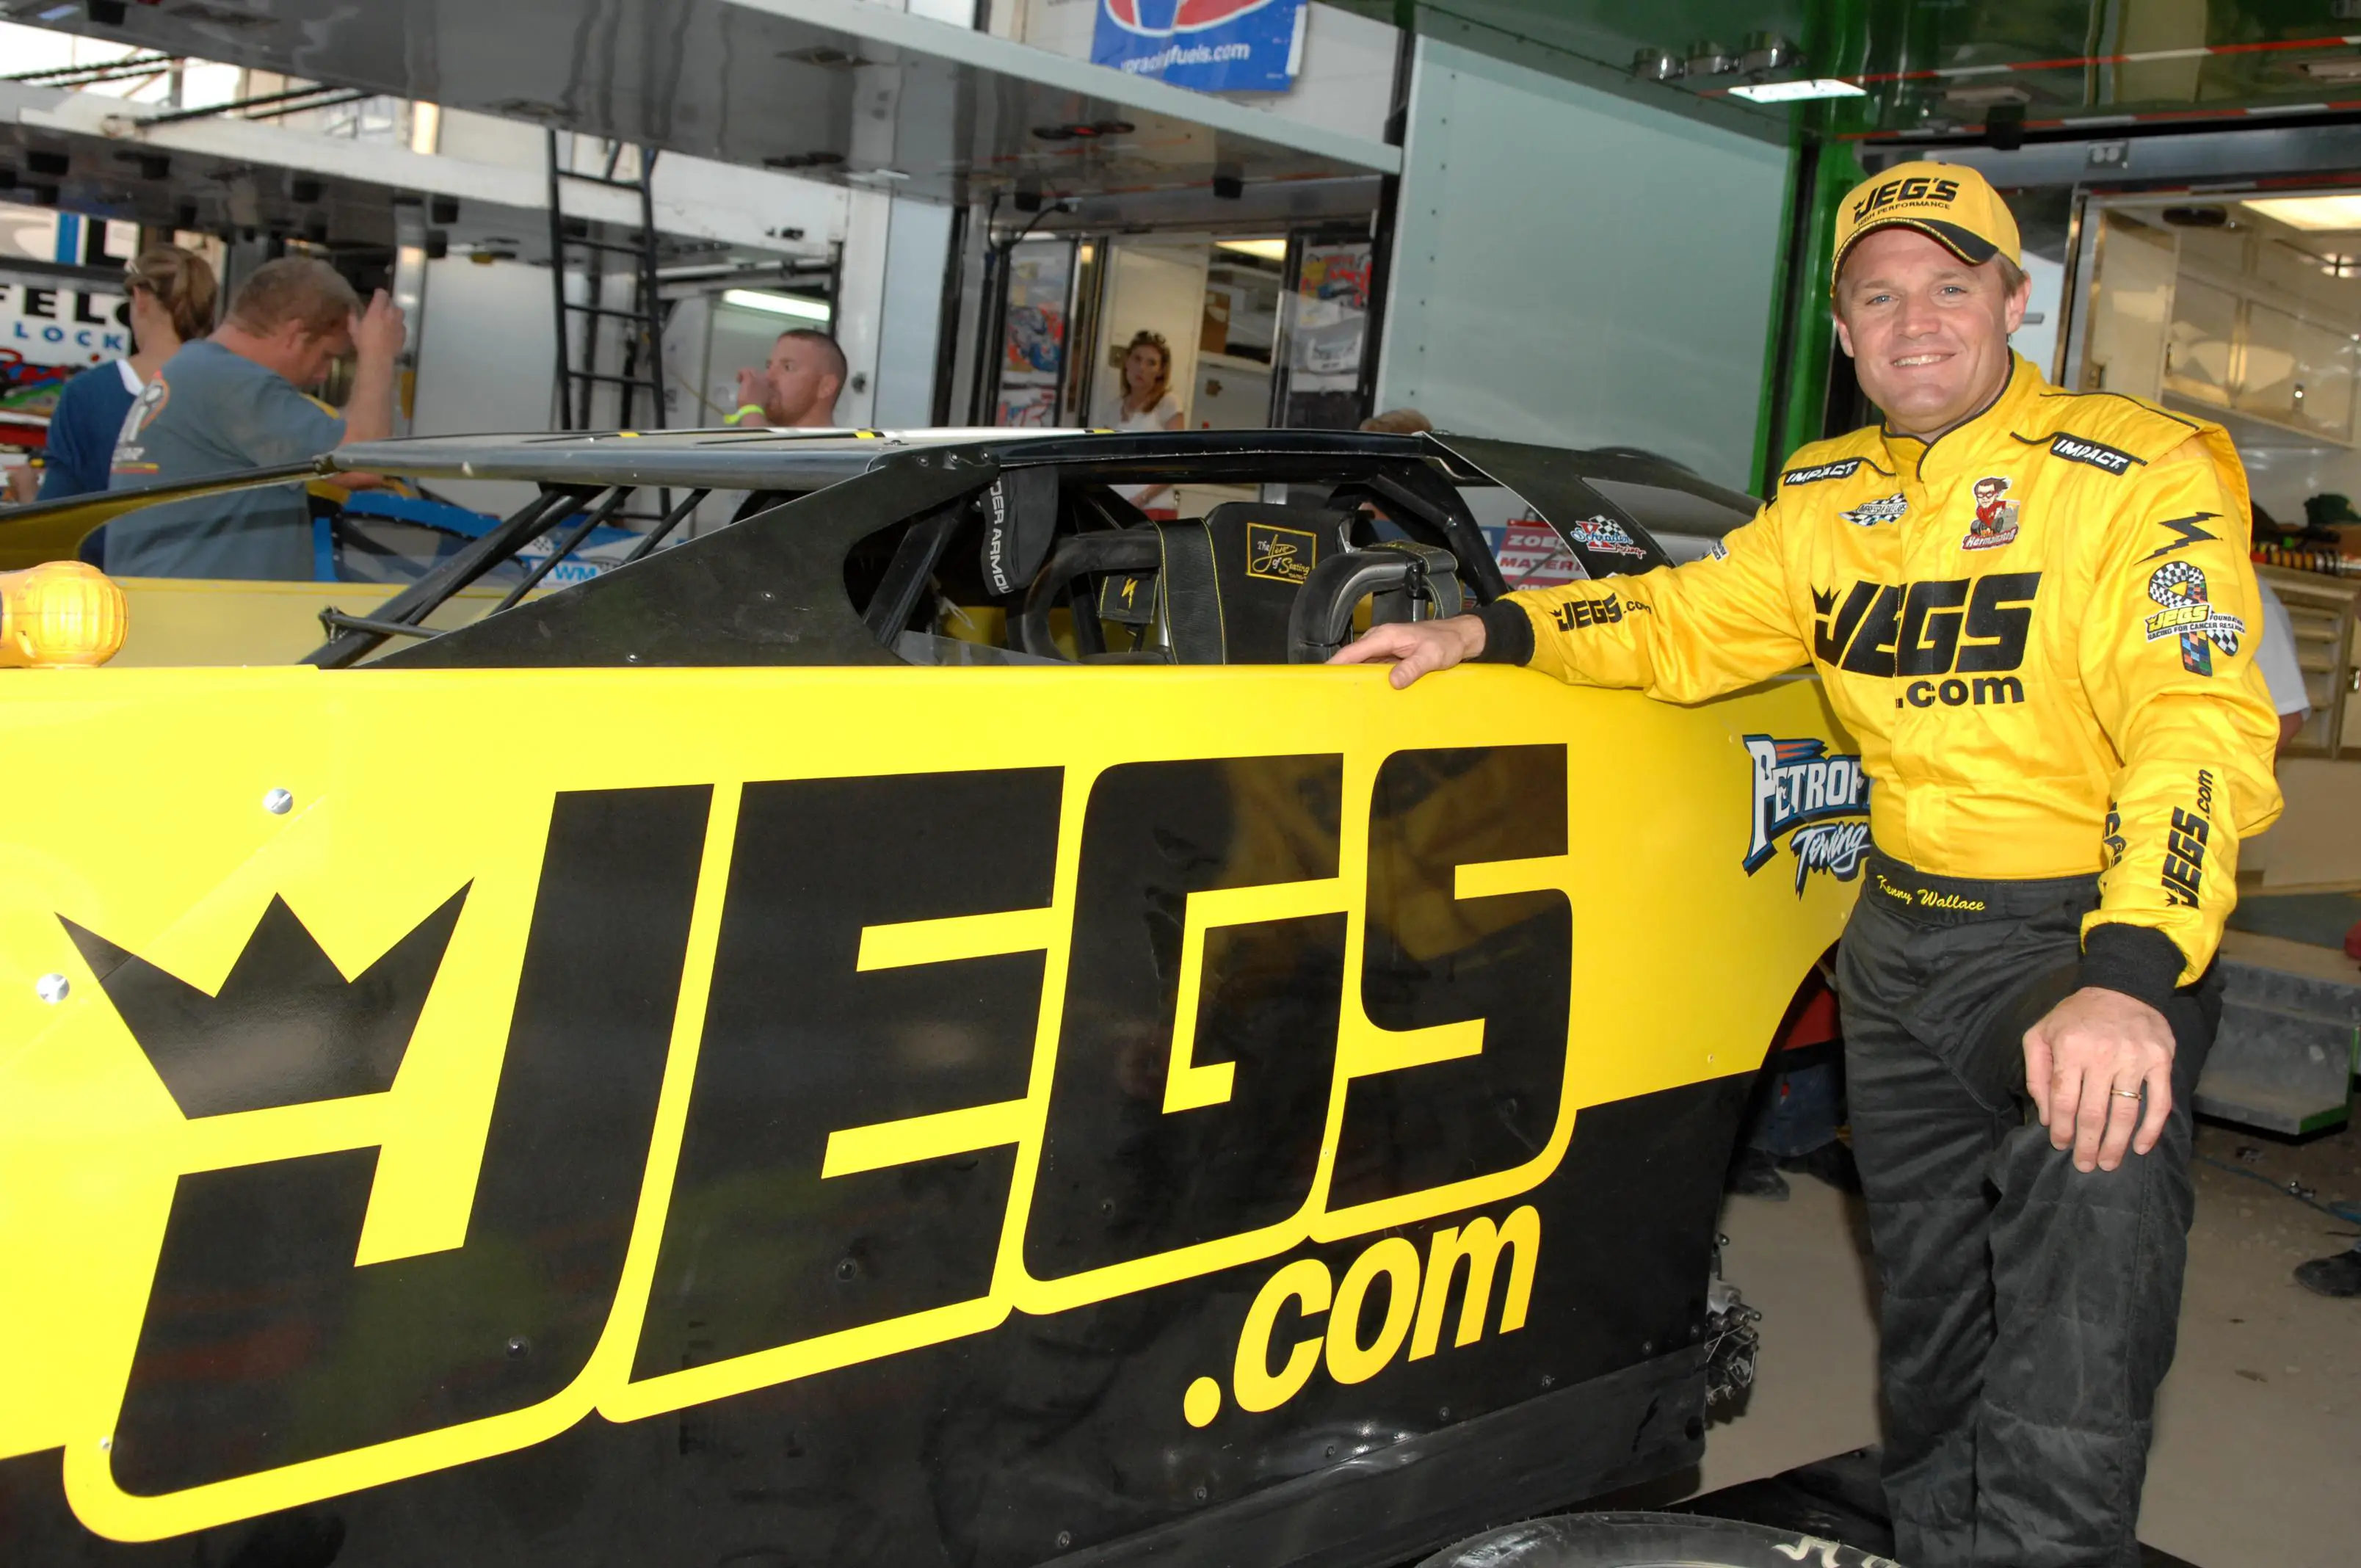 wallace-off-and-running-with-team-jegs